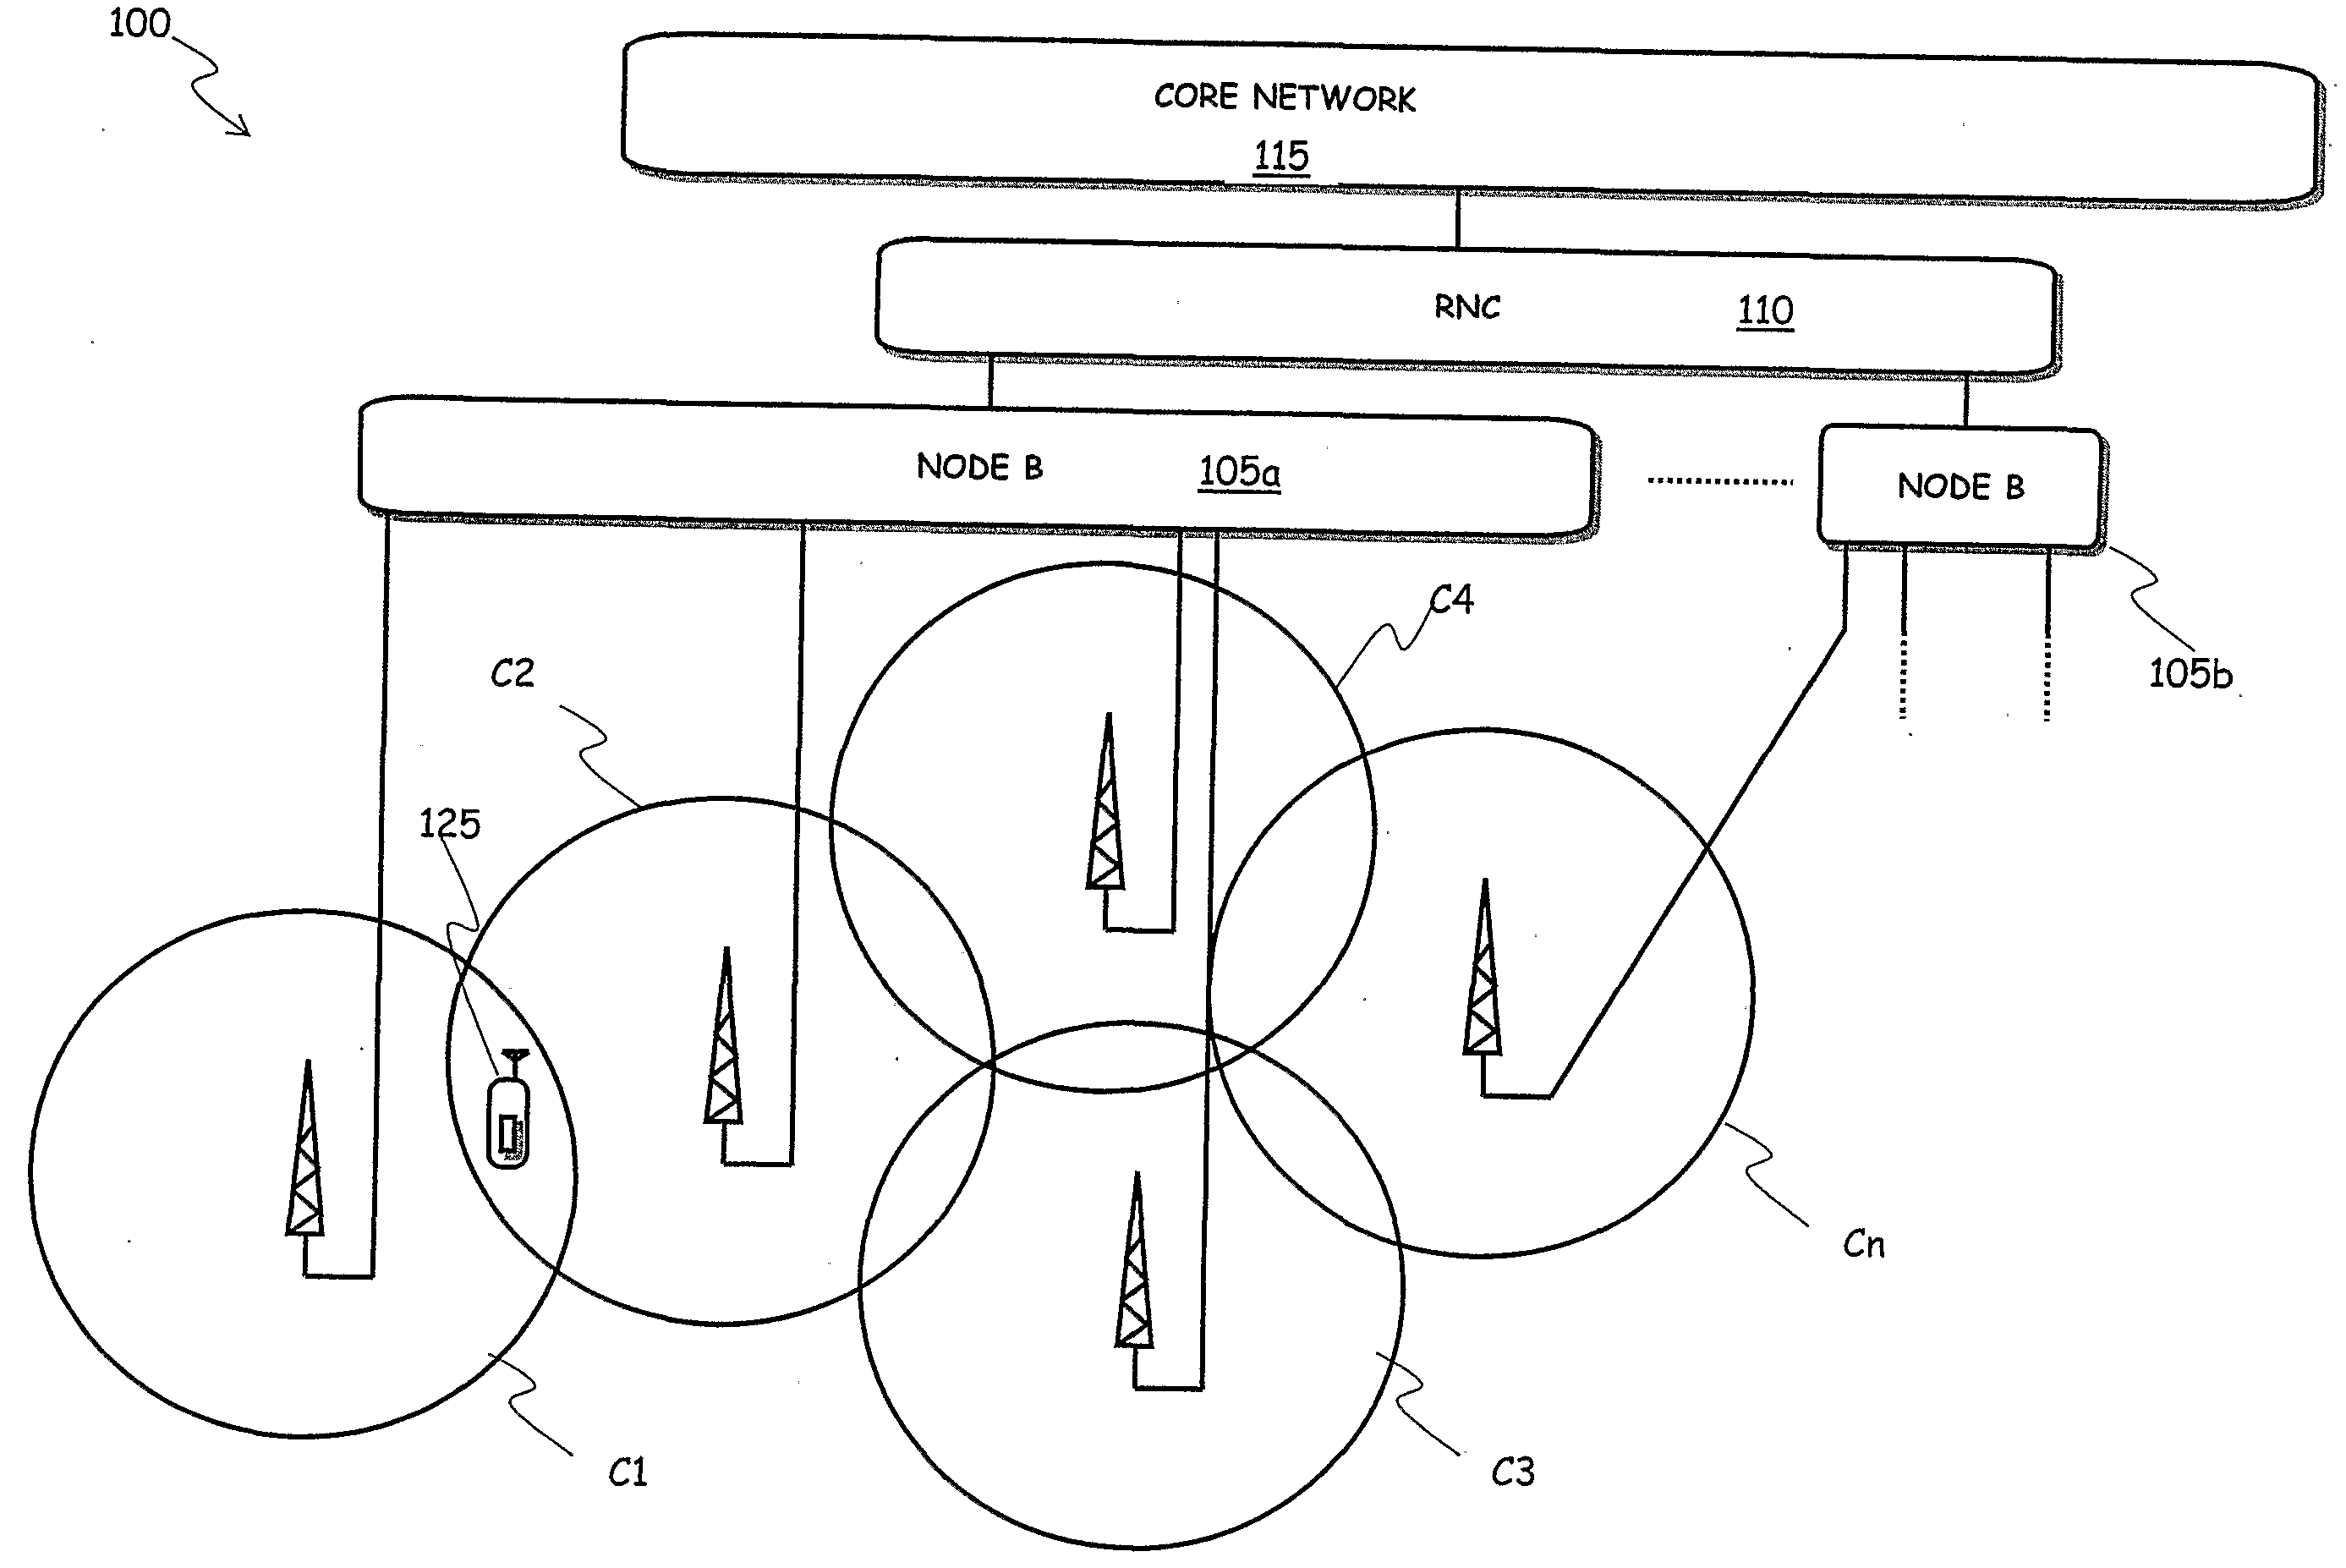 Method for Planning a Cellular Mobile Telecommunications Network